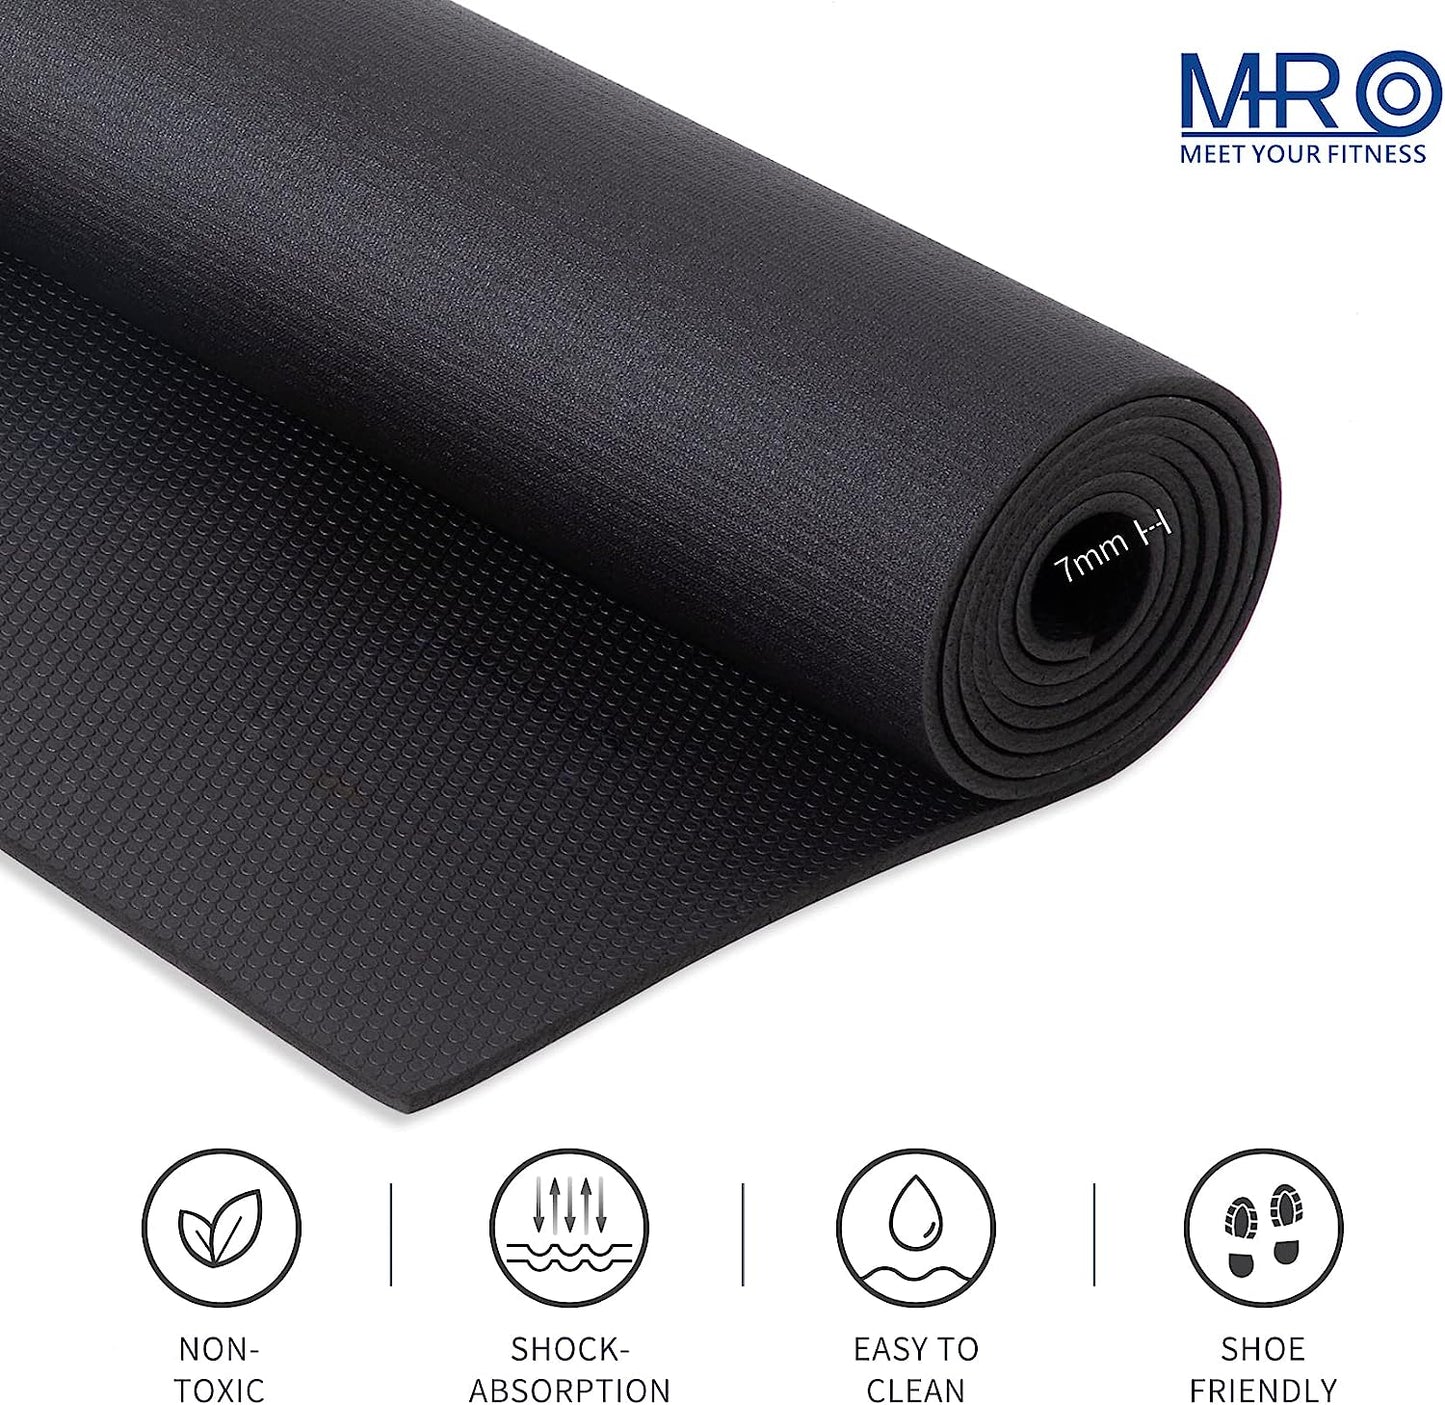 Premium Large Exercise Mat 6'x4.5'x7mm, Ultra Durable Workout Mats for Home Gym Flooring, Non-Slip, Thick Cardio Mat for Plyo, MMA, Jump, Weightlifting- Shoe Friendly, Eco Friendly